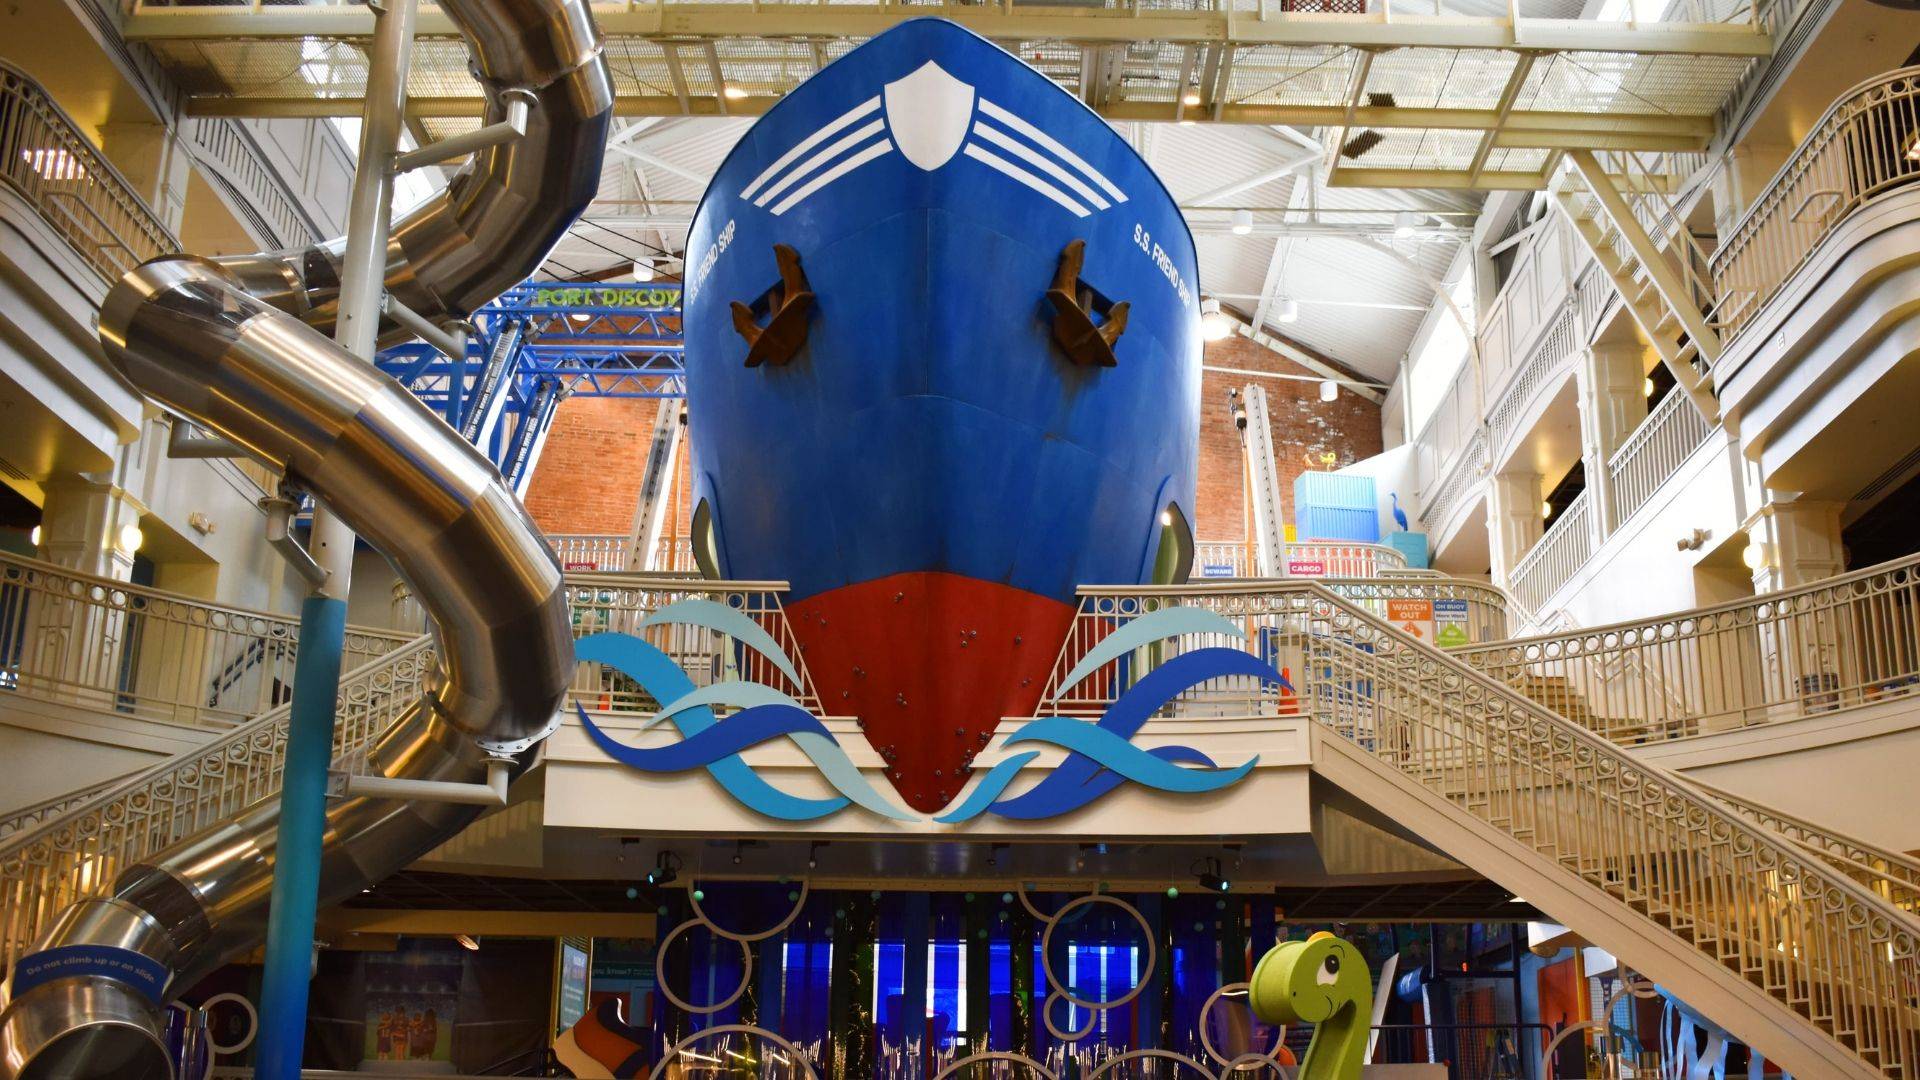 A large blue boat in a building with a slide.